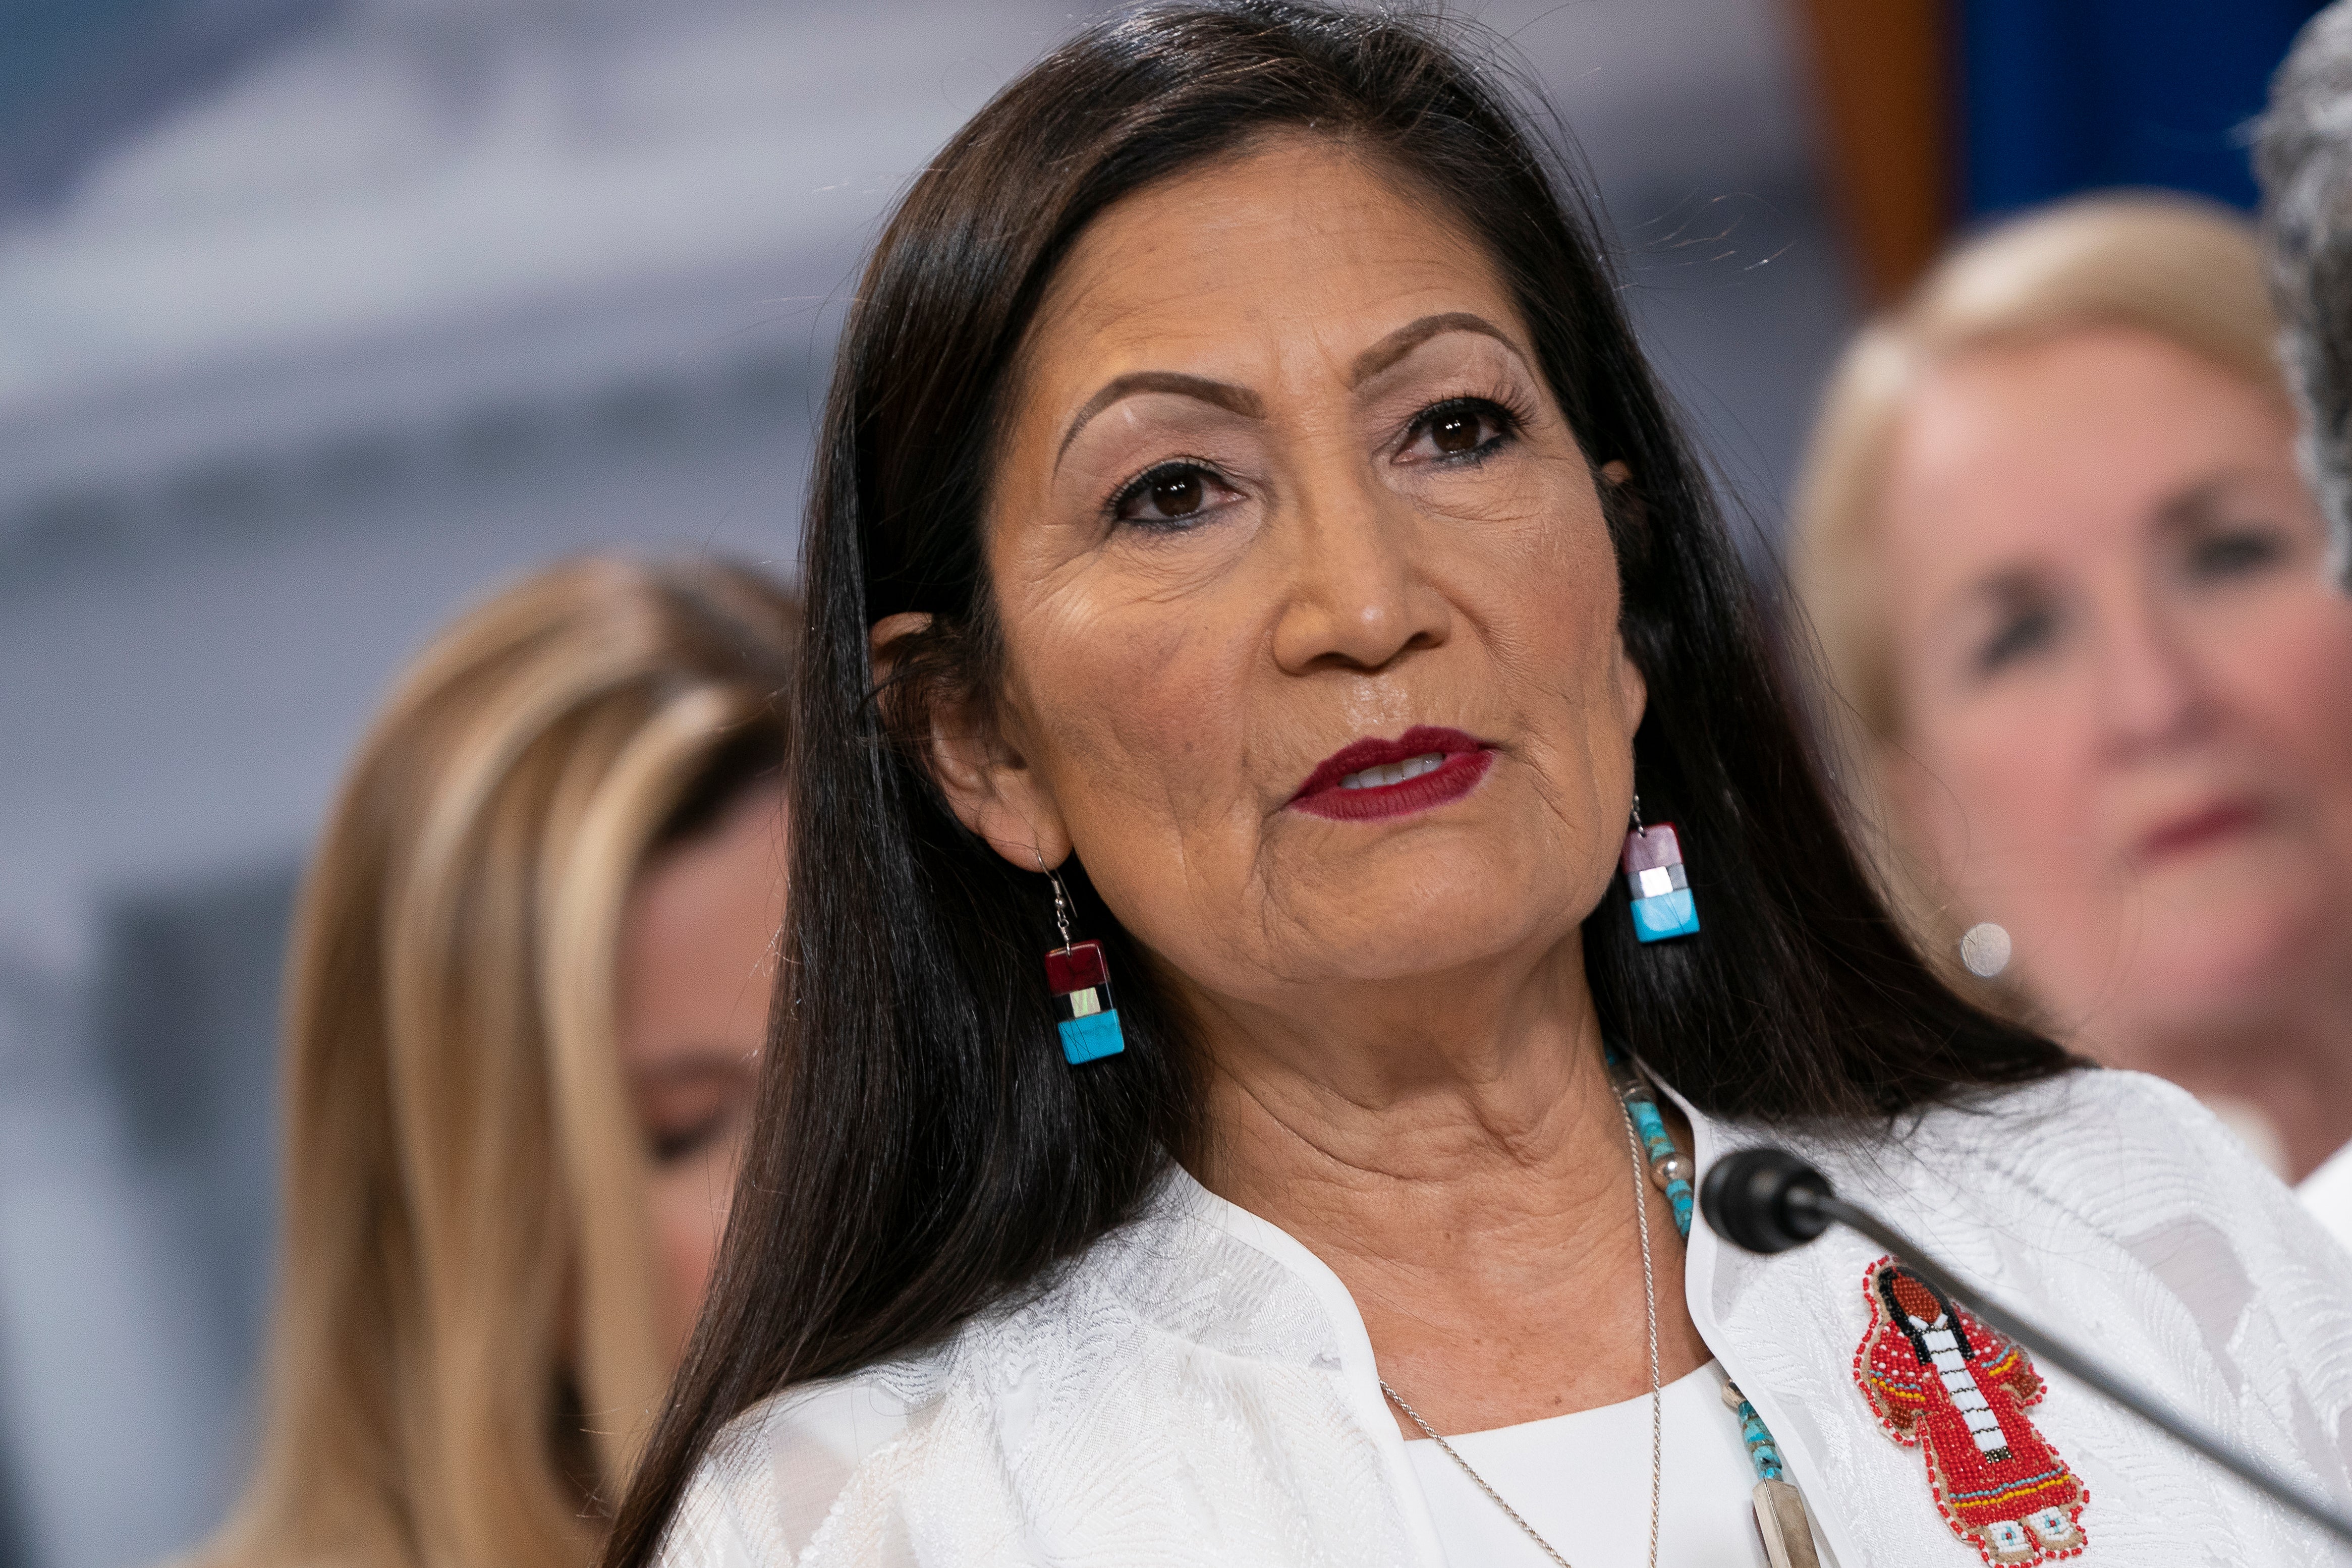 US Rep Deb Haaland (D-NM) speaks during a news conference with members of the Democratic Women’s Caucus prior to State of the Union at the U.S. Capitol on 4 February, 2020 in Washington, DC. Ms Haaland announced plans for the US to investigate the ‘unspoken traumas’ of Native American boarding schools.